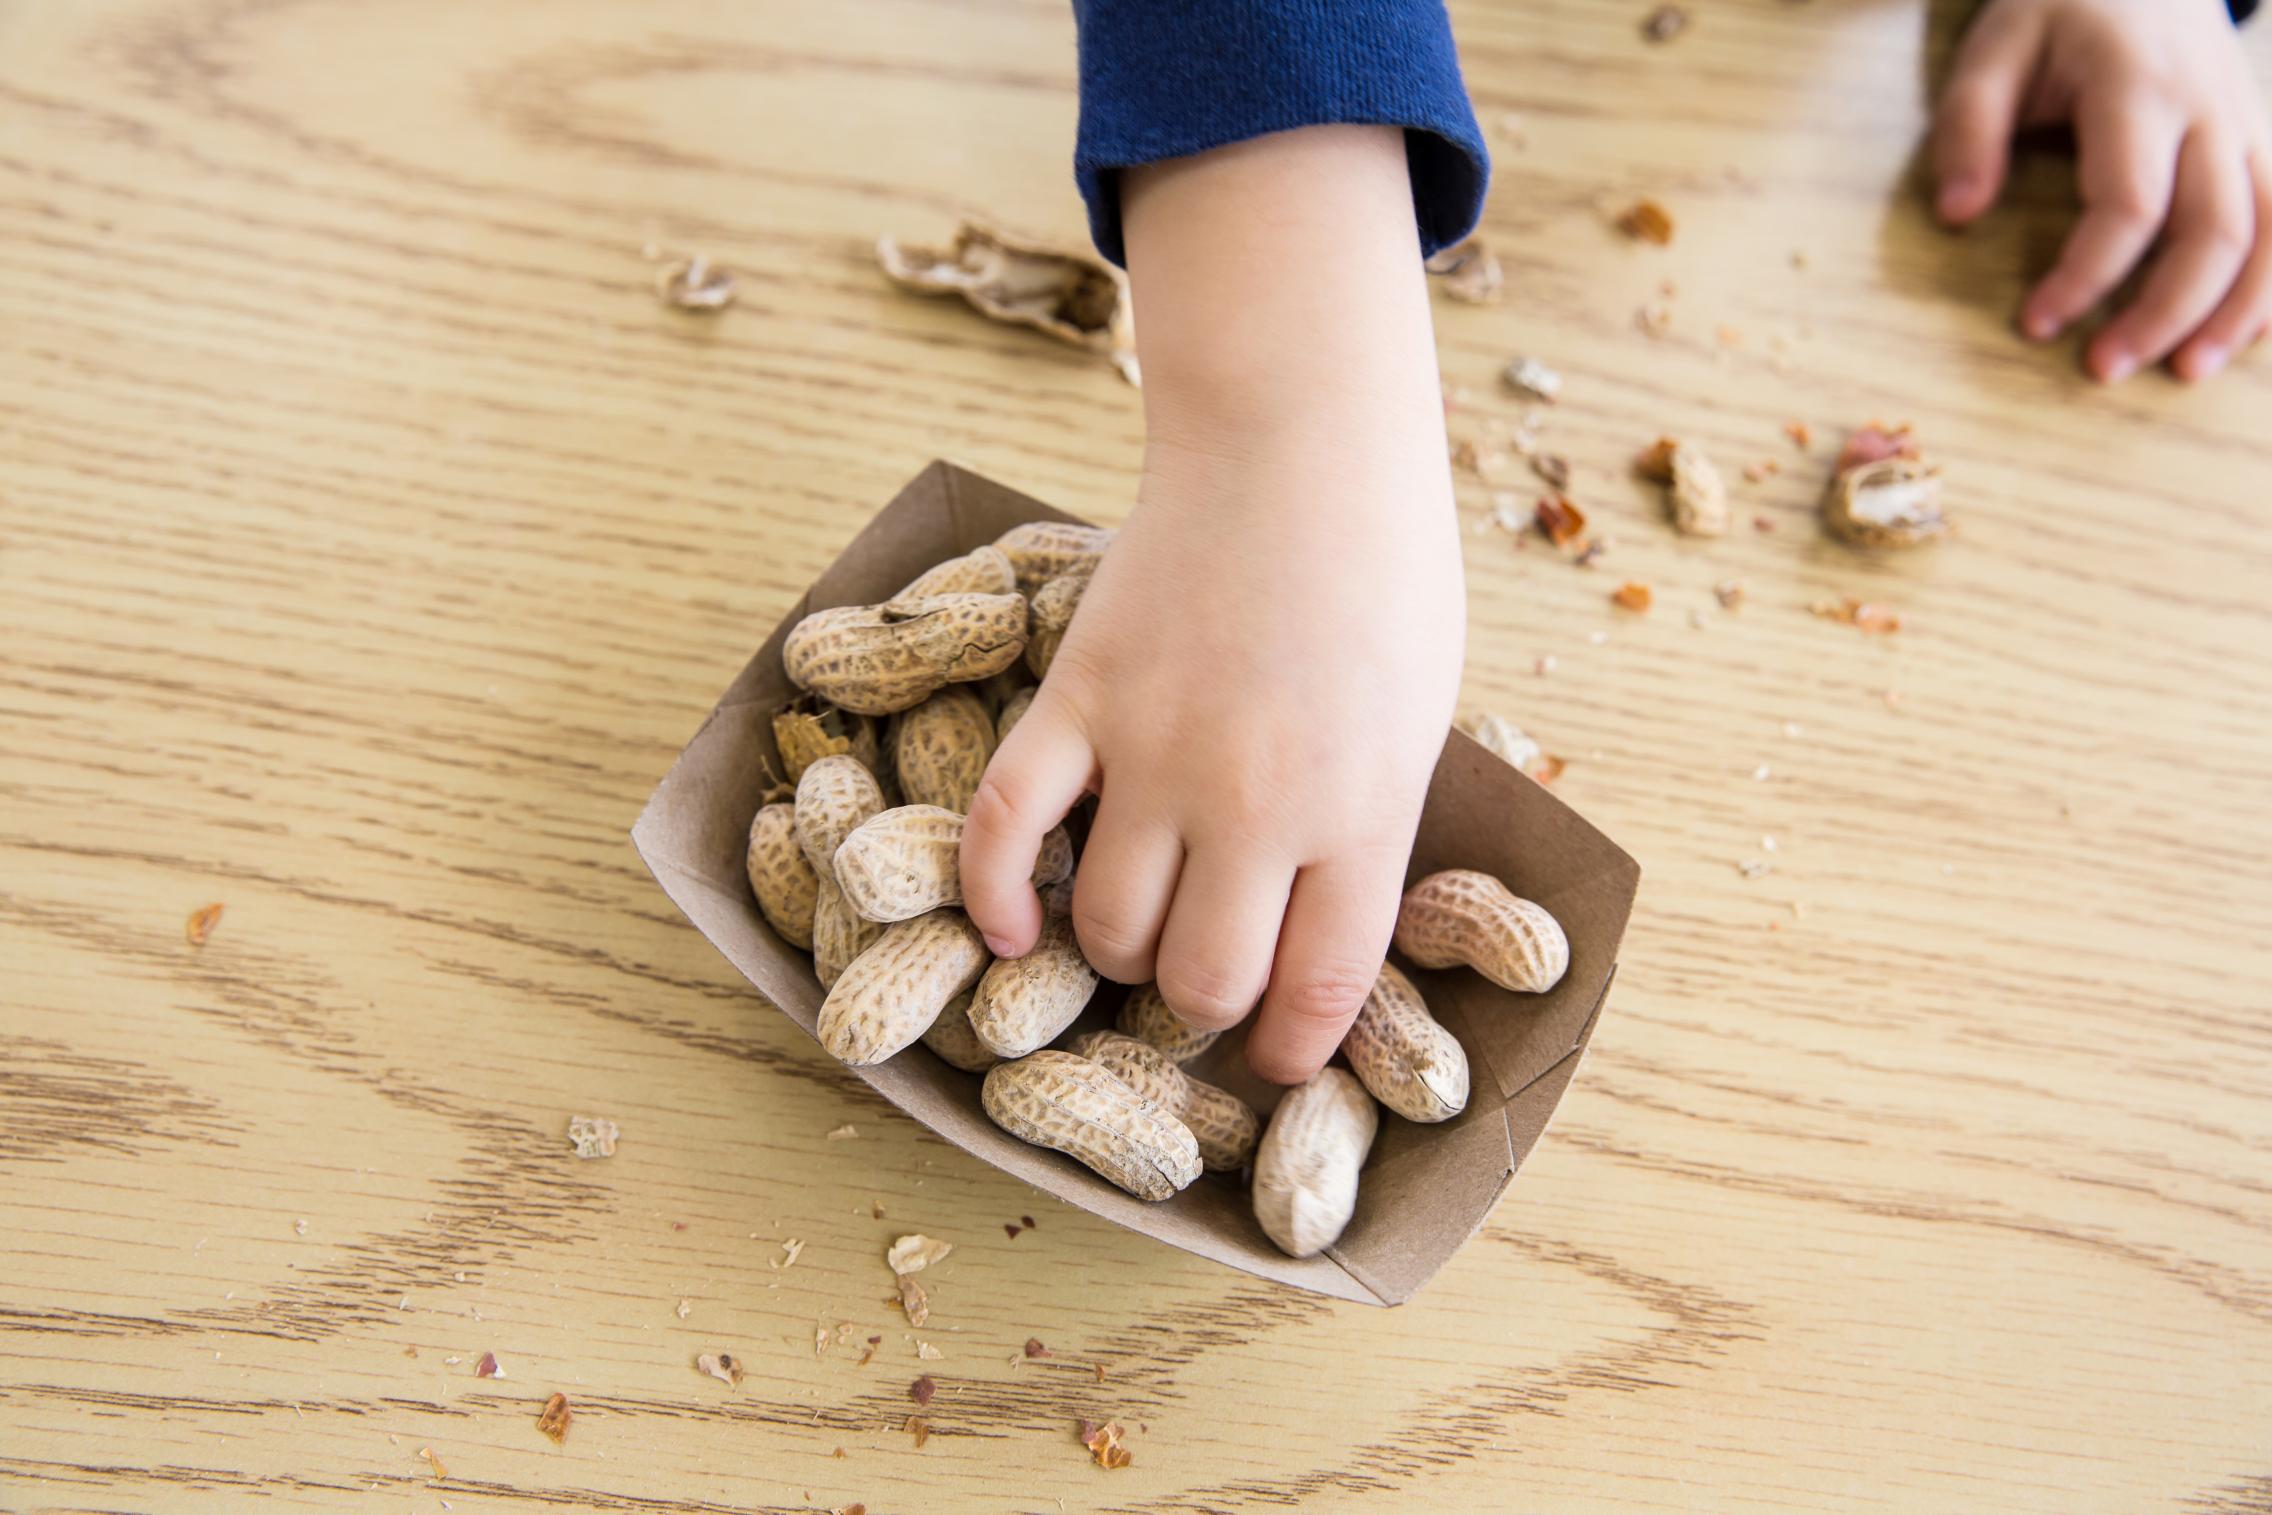 Peanut allergy treatment can be safer with appropriate cotreatments